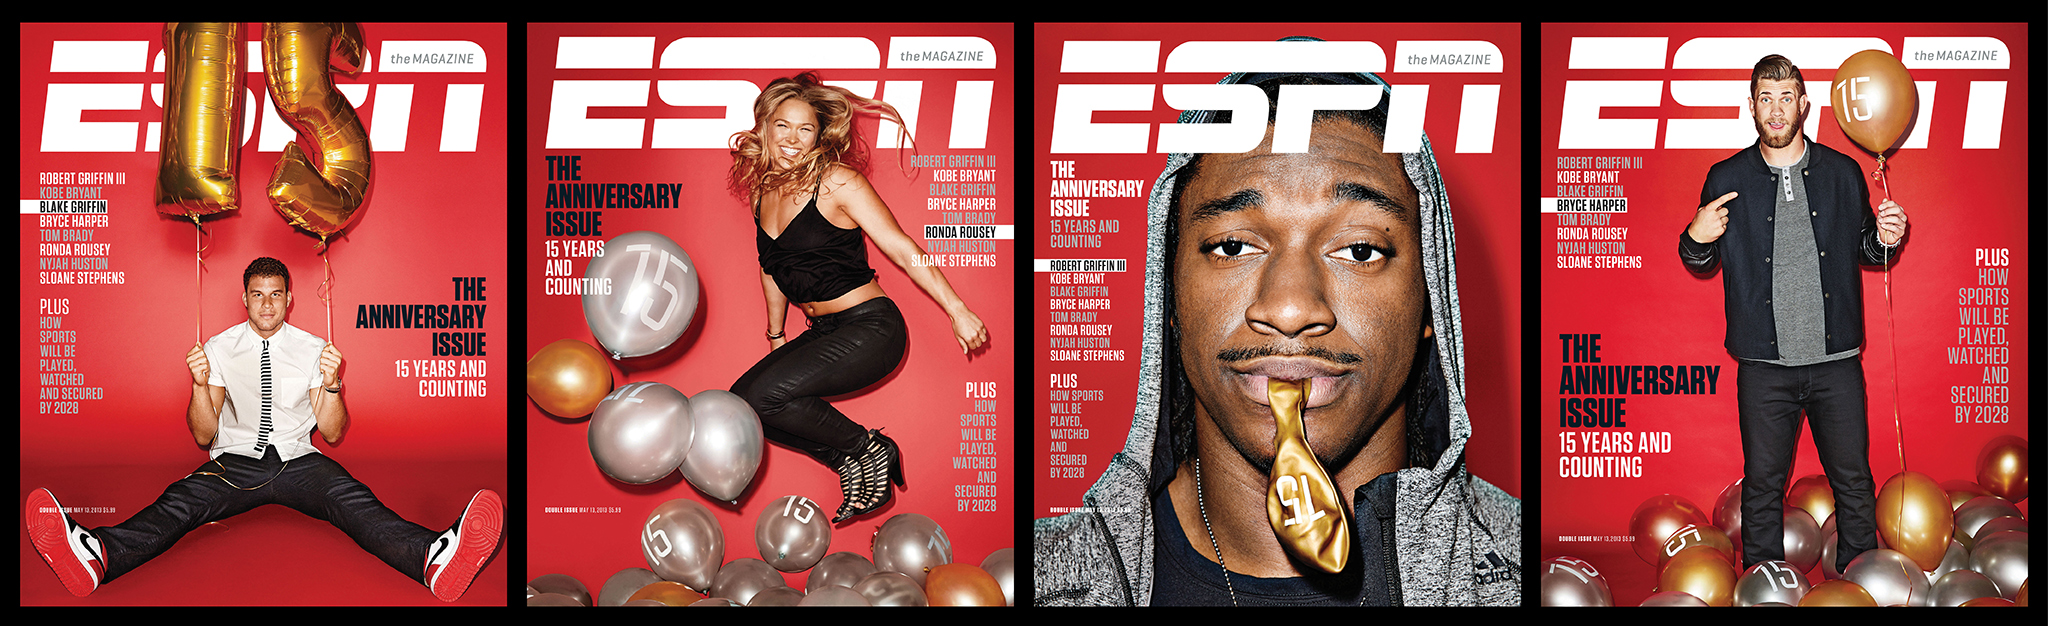 Mag 15:' ESPN The Magazine counts down to its 15th anniversary